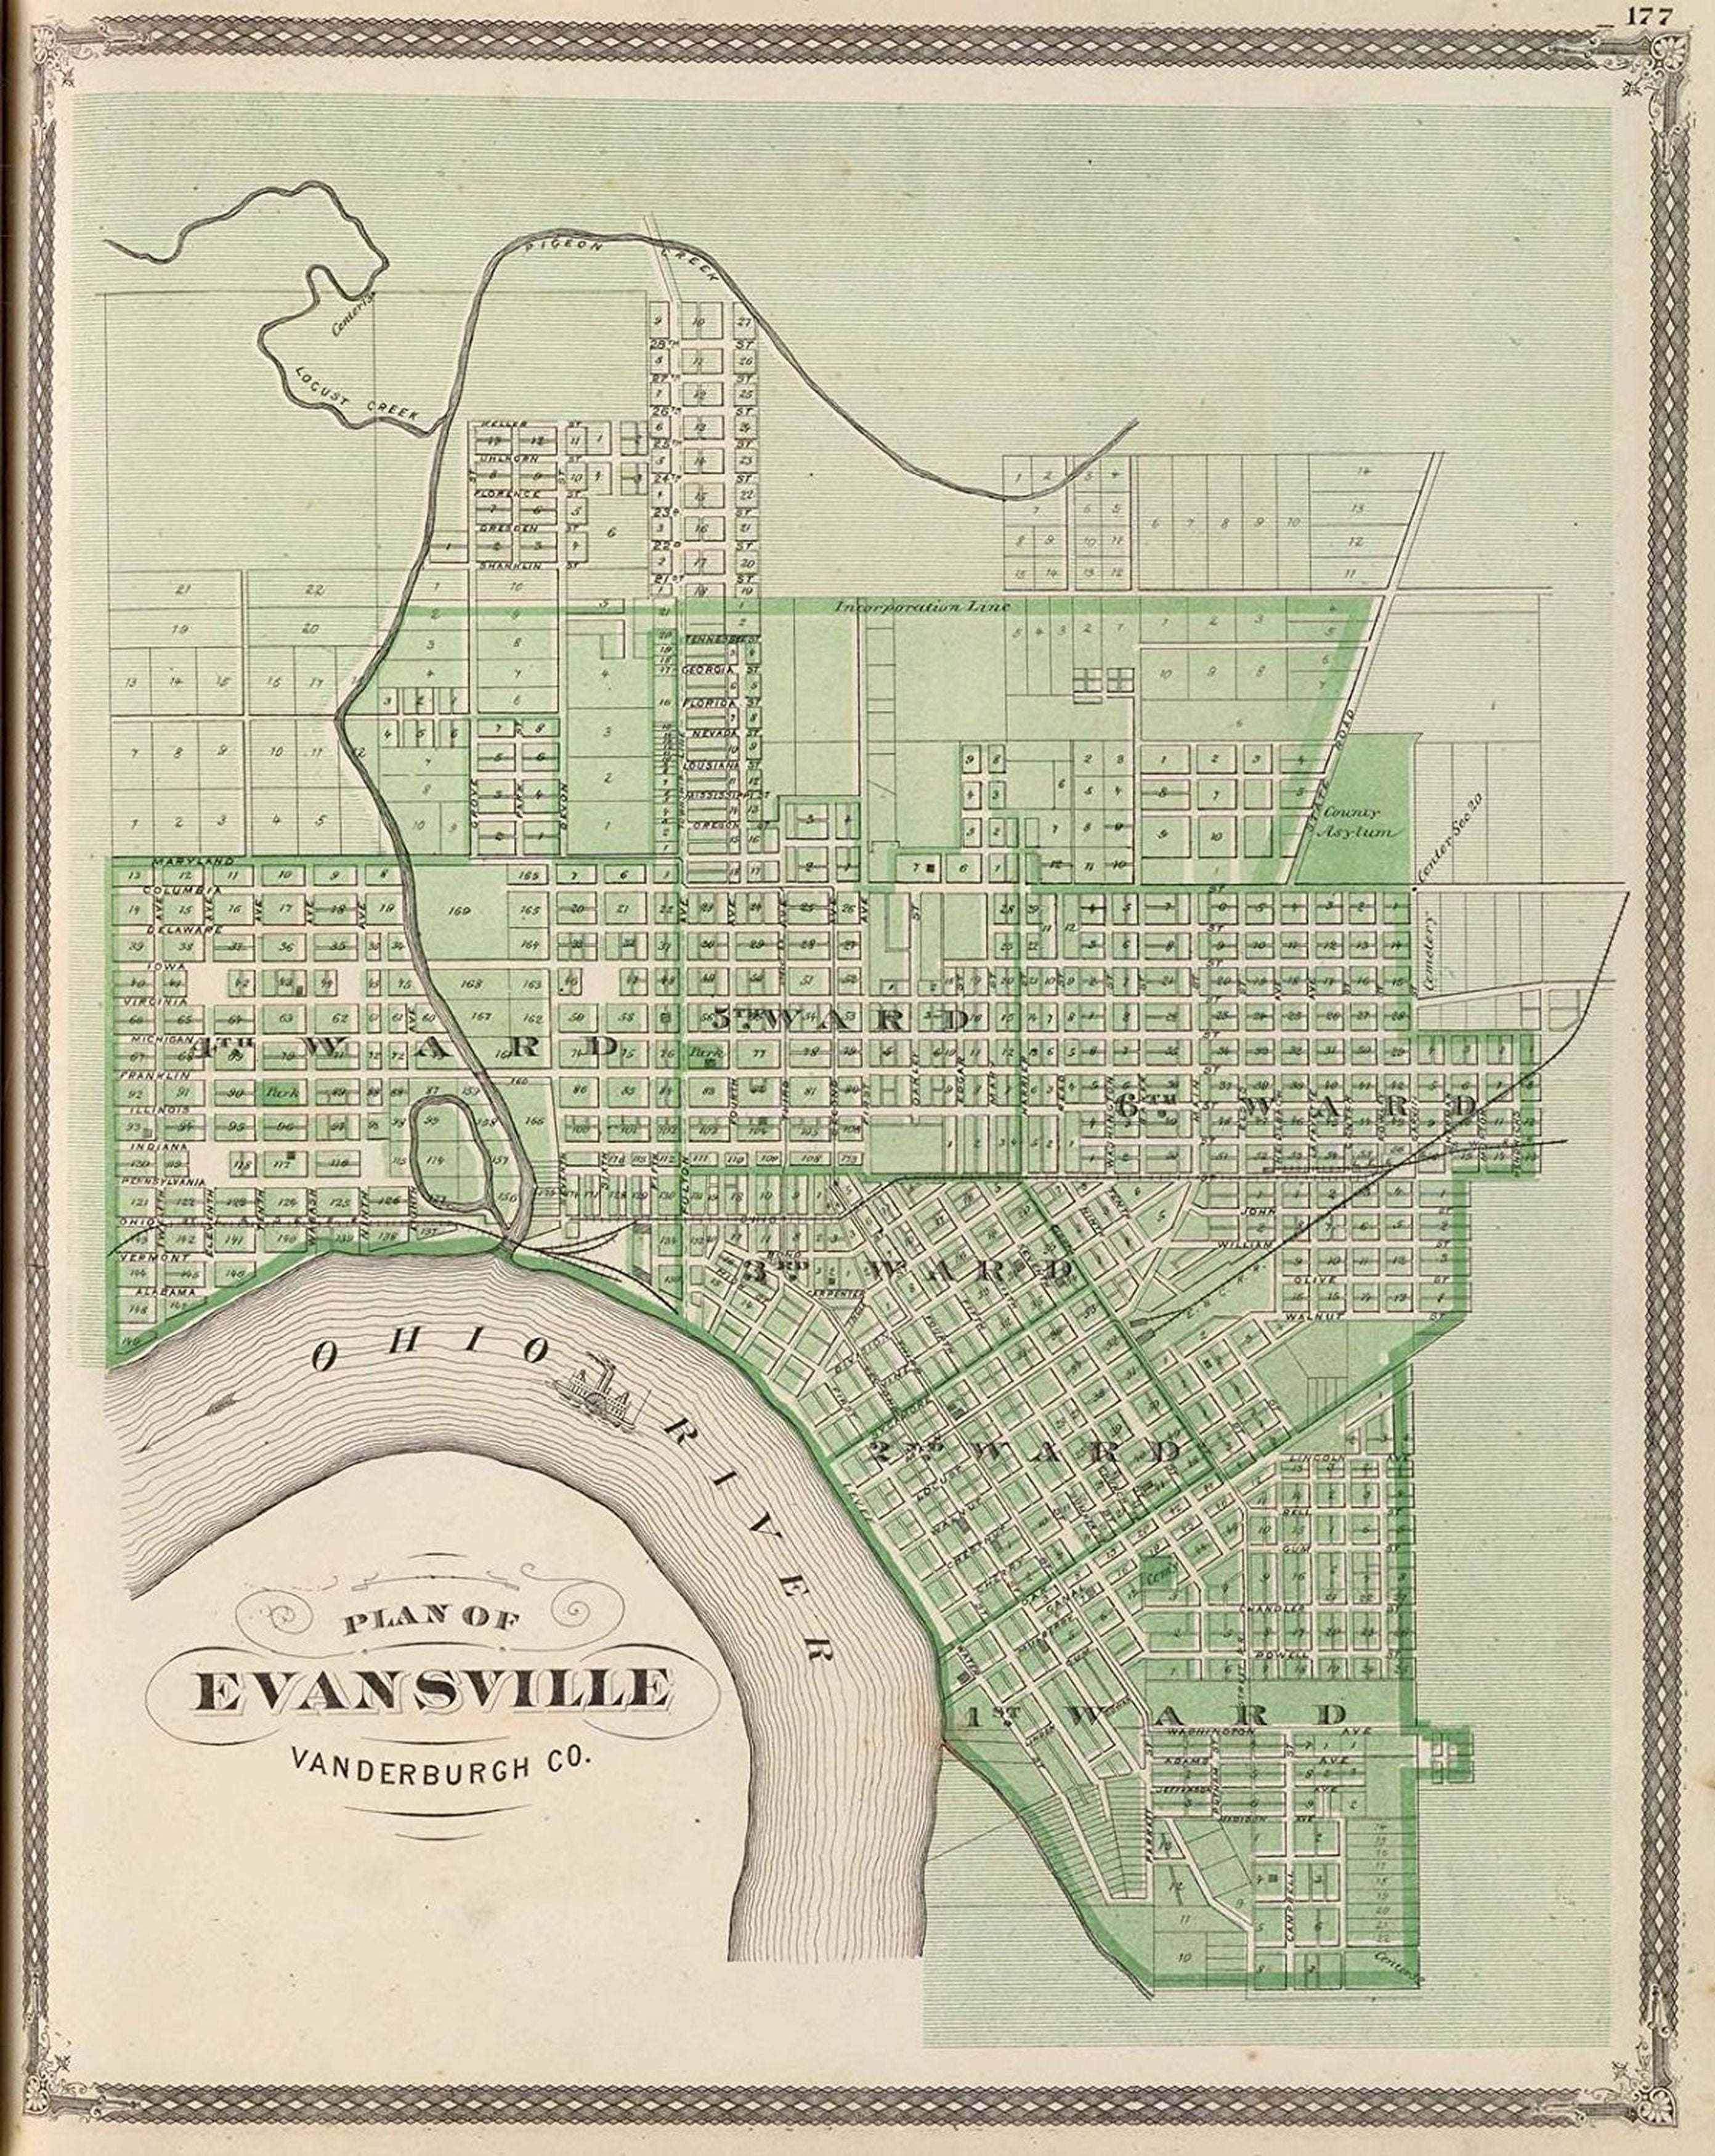 Plan of Evansville, Vanderburgh Co. (Published by Baskin, Forster and Co. Lakeside Building Chicago, 1876. Engraved and Printed by Chas. Shober and Co. Props. of Chicago Lithographing Co.), Illustrated historical atlas of the State of Indiana. Published